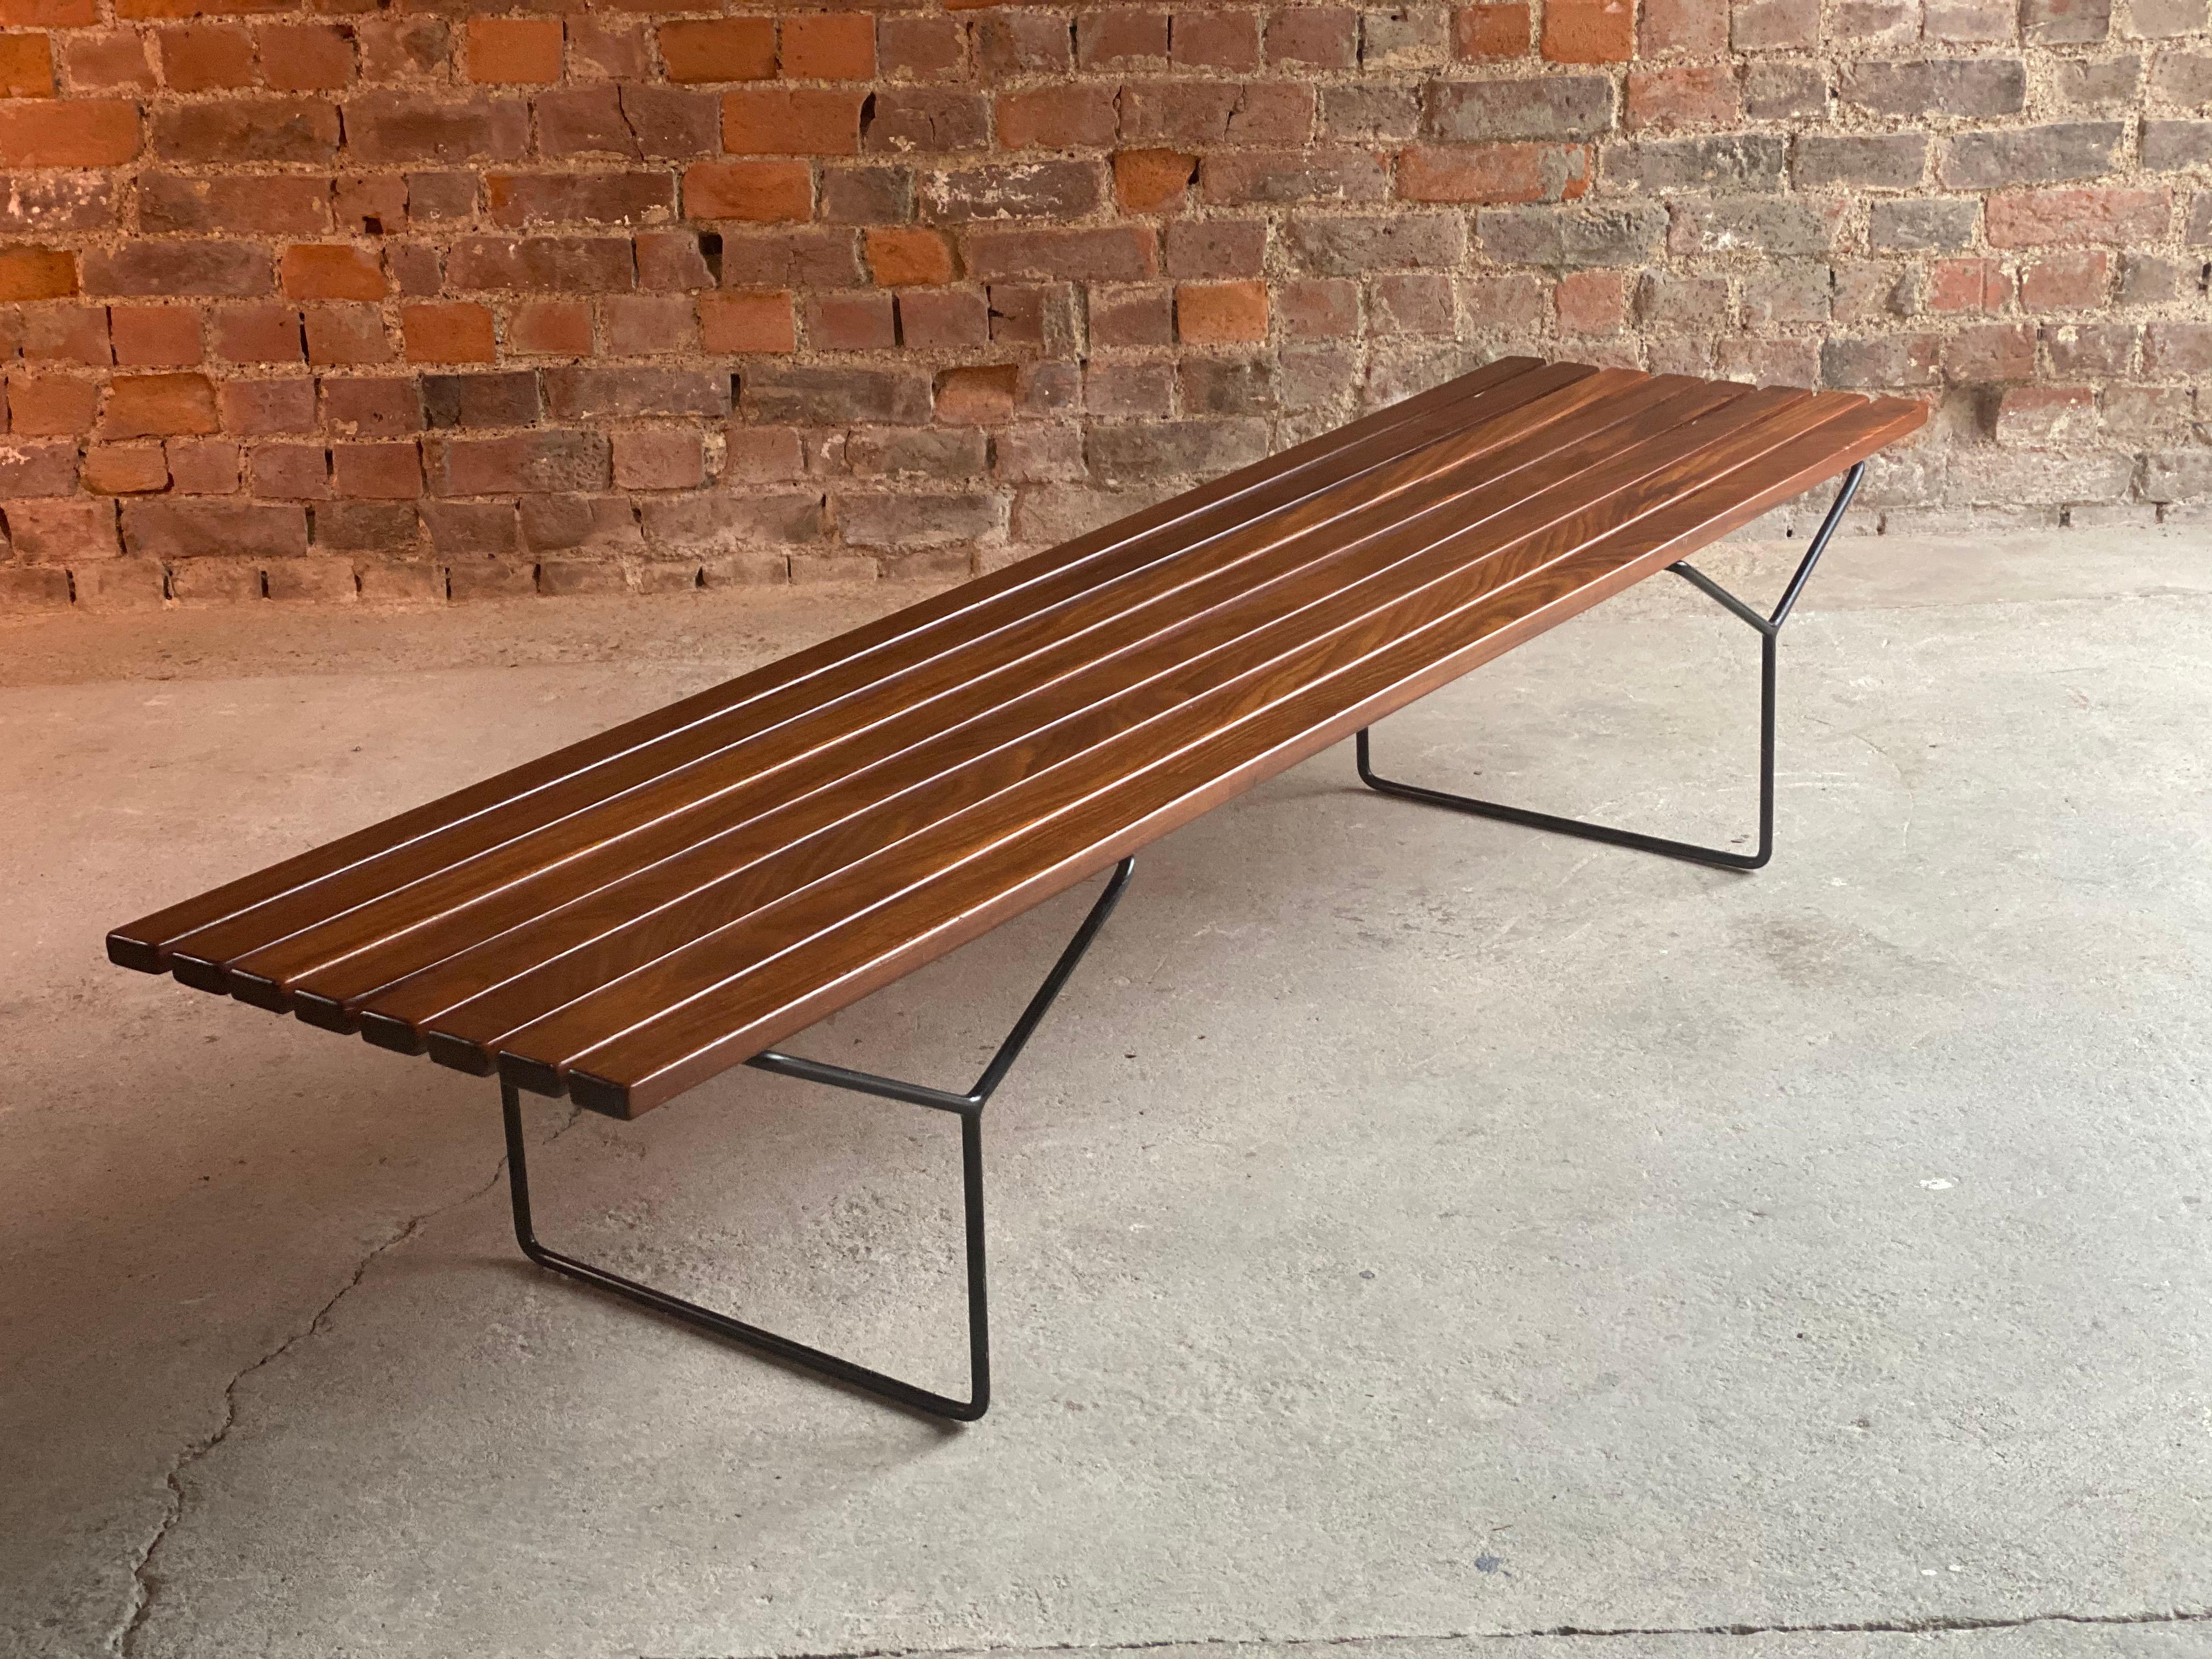 Midcentury Harry Bertoia bench by Knoll, circa 1960s

Magnificent original Bertoia bench for Knoll circa 1960s, the bench with eight teak slats raised on black coated legs, a true Bertoia Classic, can be used either as a bench or coffee